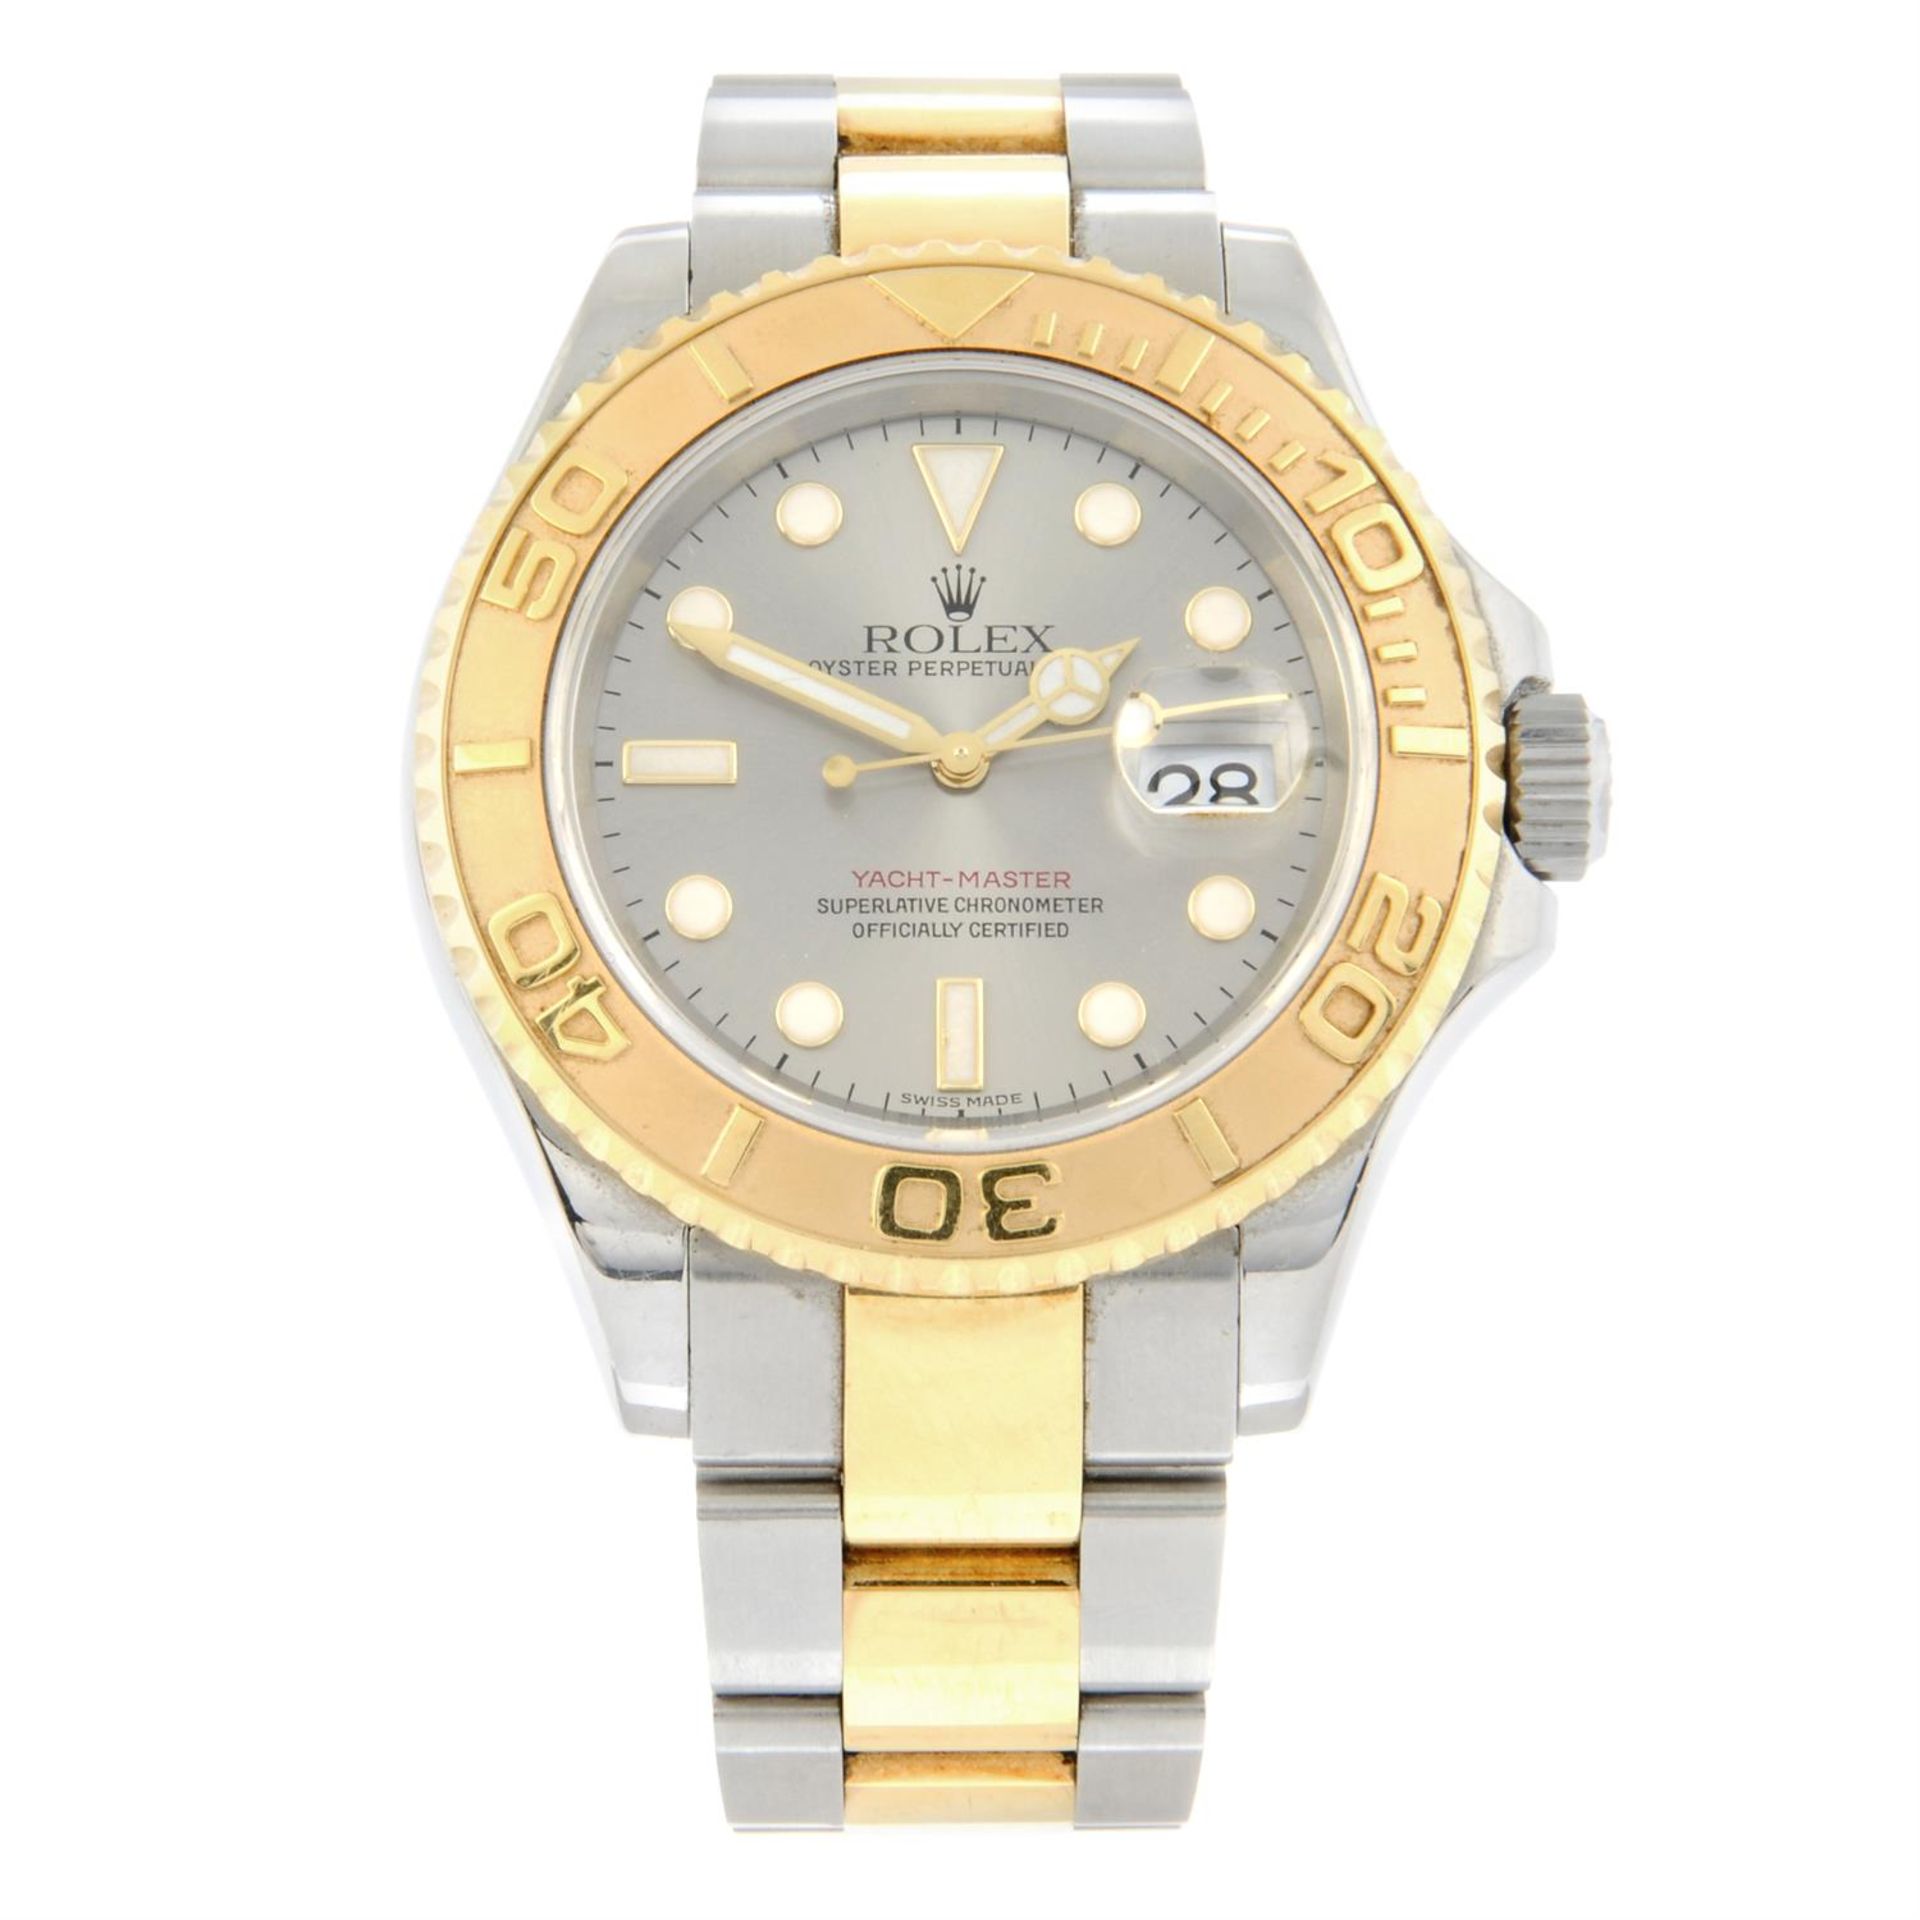 Rolex - an Oyster Perpetual Date Yacht-Master watch, 42mm.